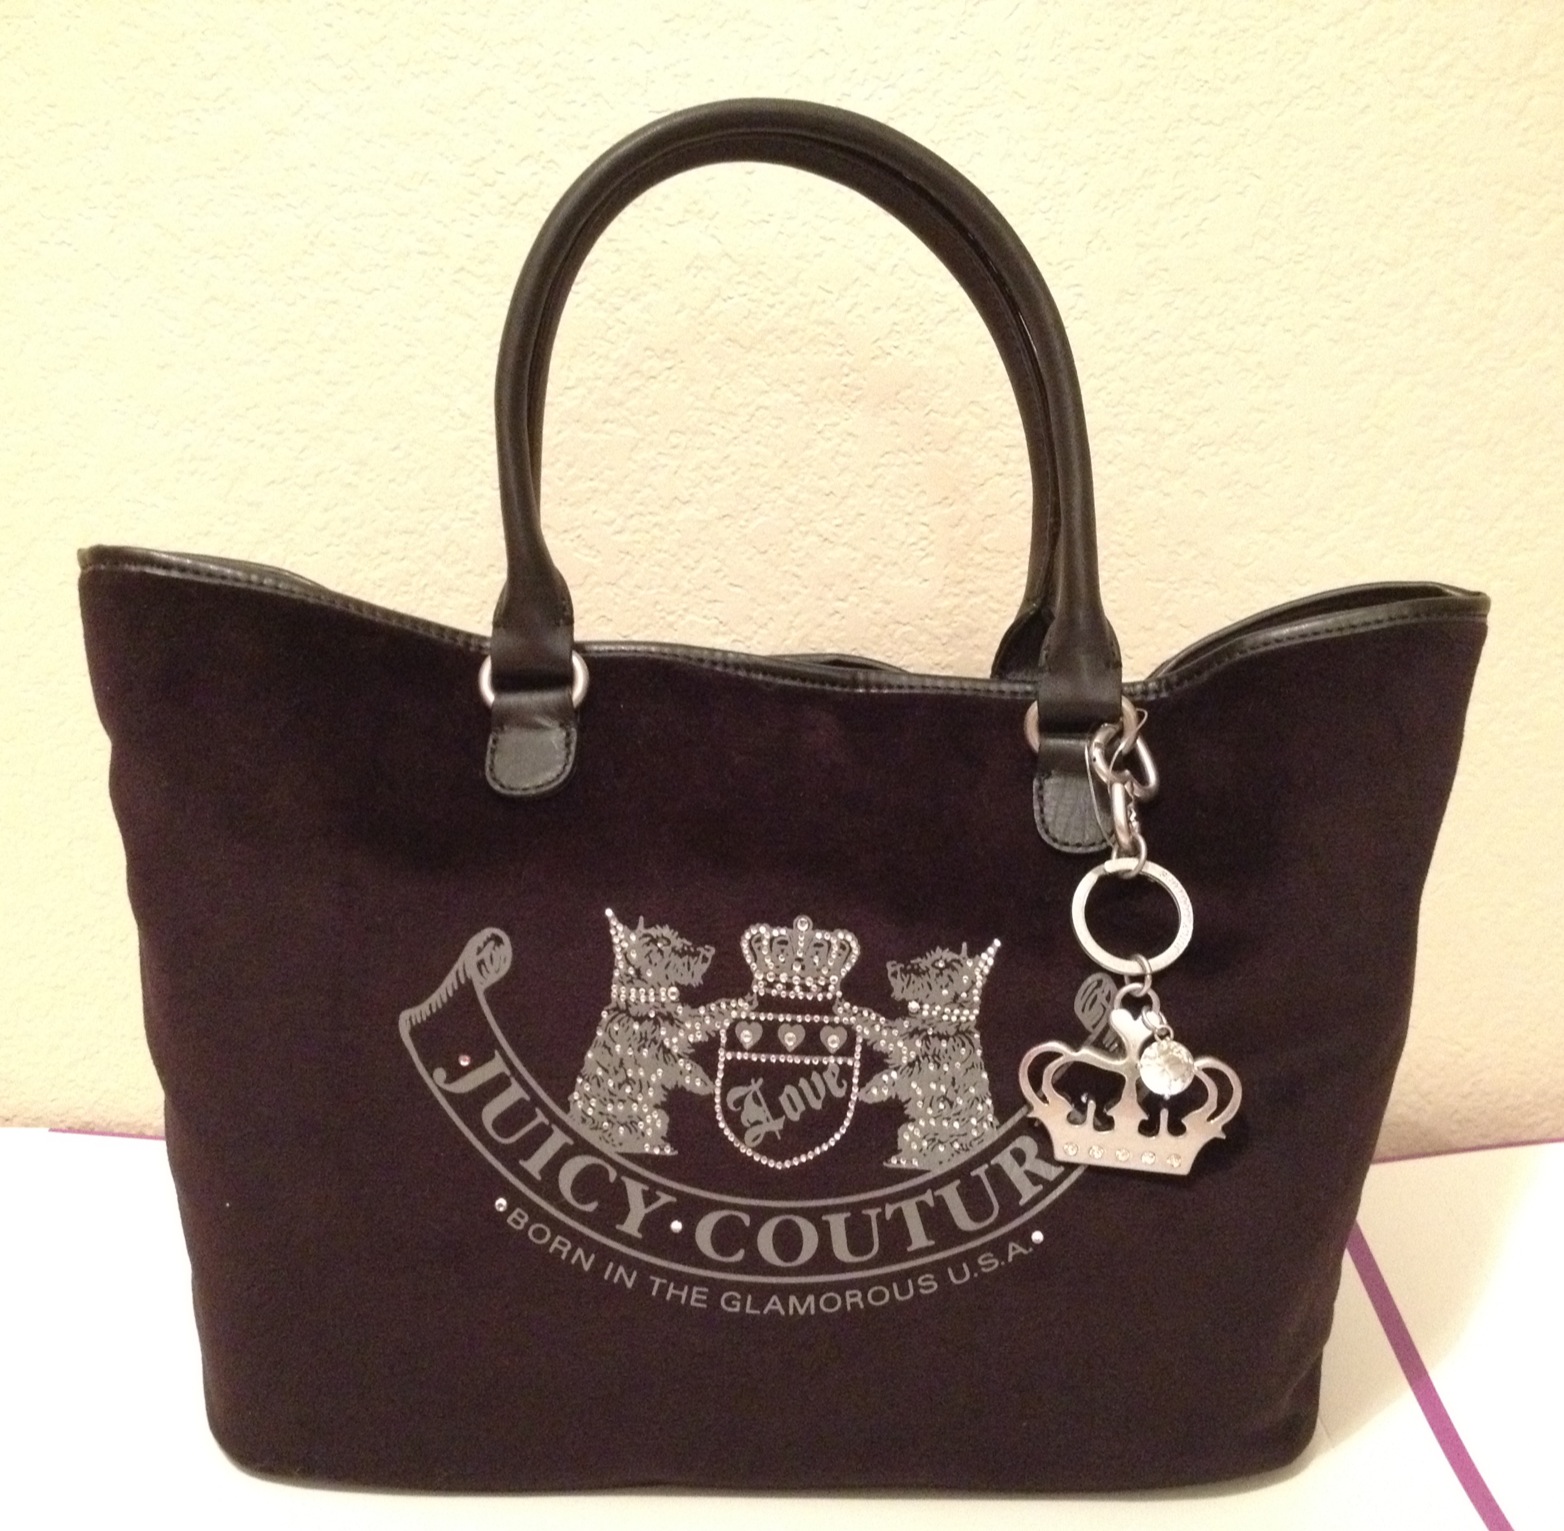 Branded Deals: JUICY COUTURE Pammy Velour Tote Bag – YHRUO537